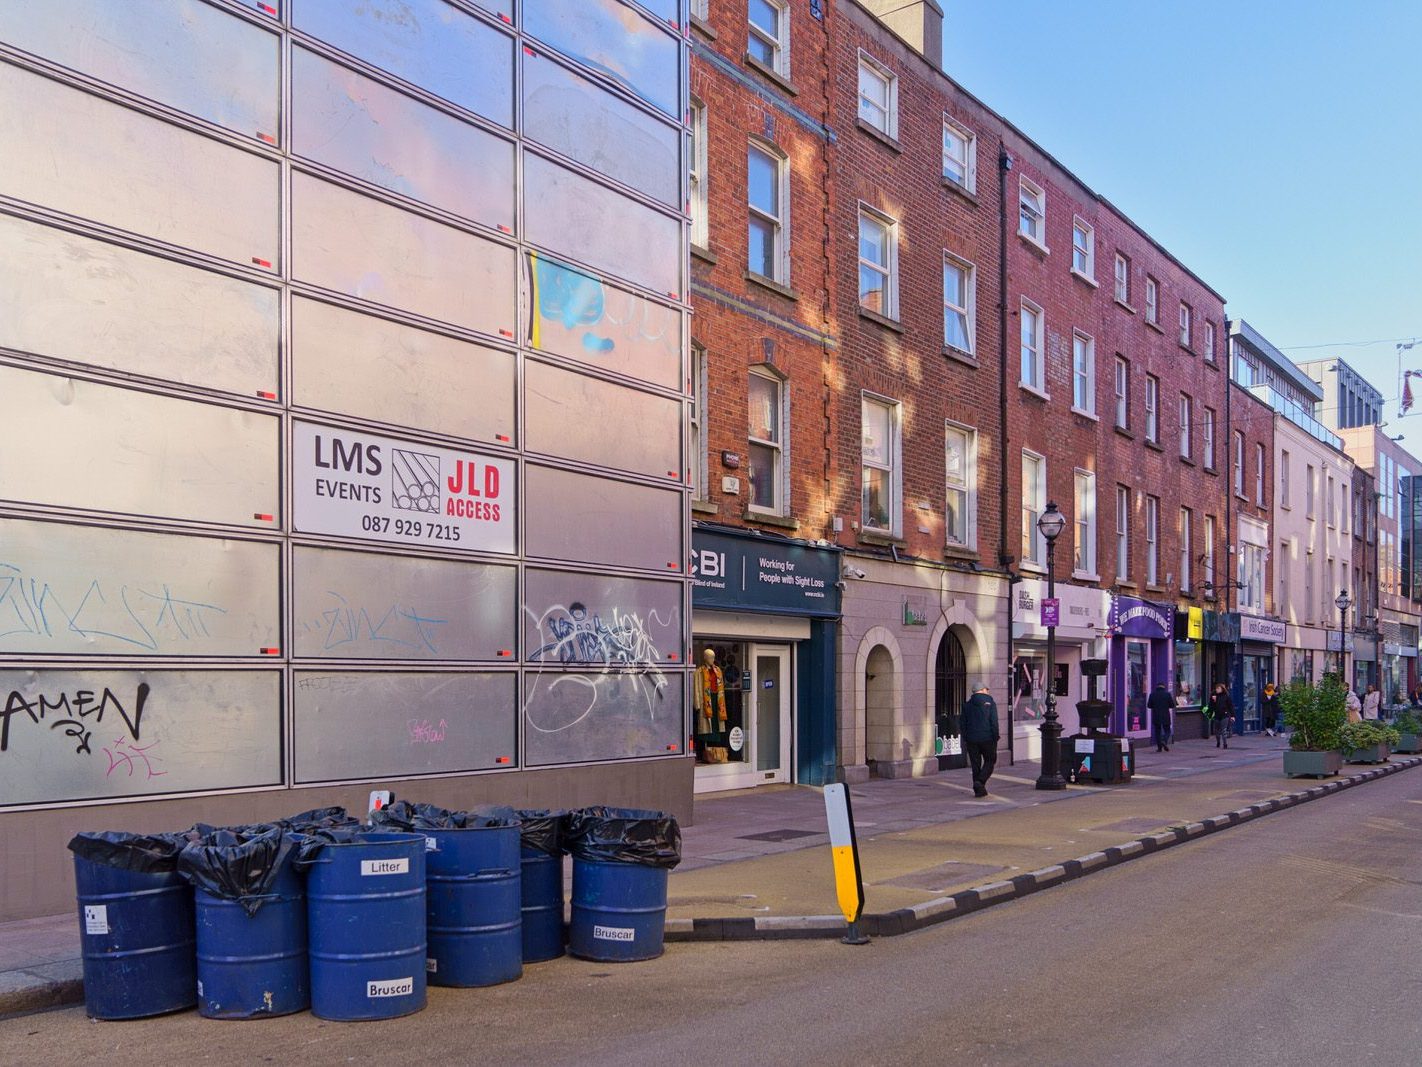 CAPEL STREET IS STILL A W.I.P. [THE PERIOD BETWEEN HALLOWEEN AND CHRISTMAS]-224802-1